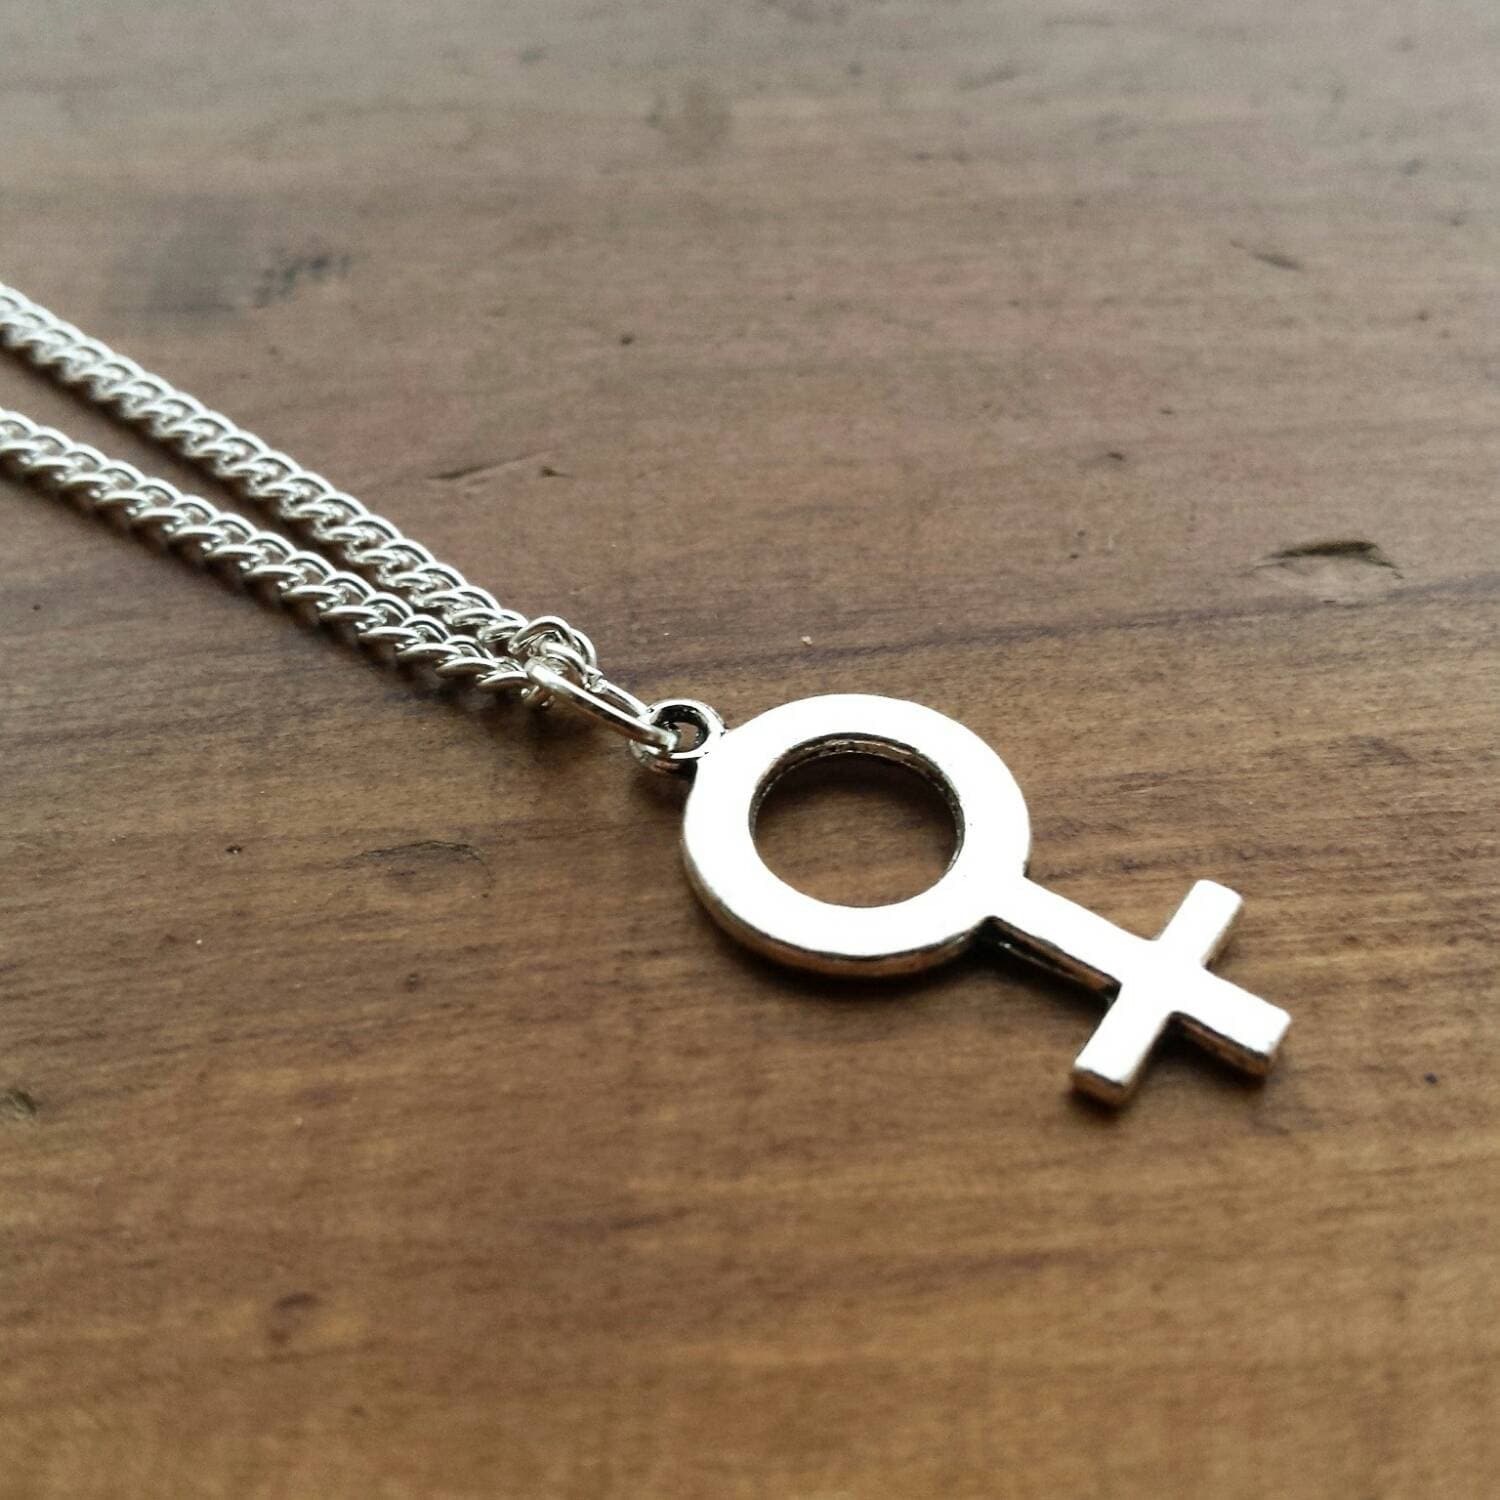 Female Symbol Charm on 18 Chain Necklace